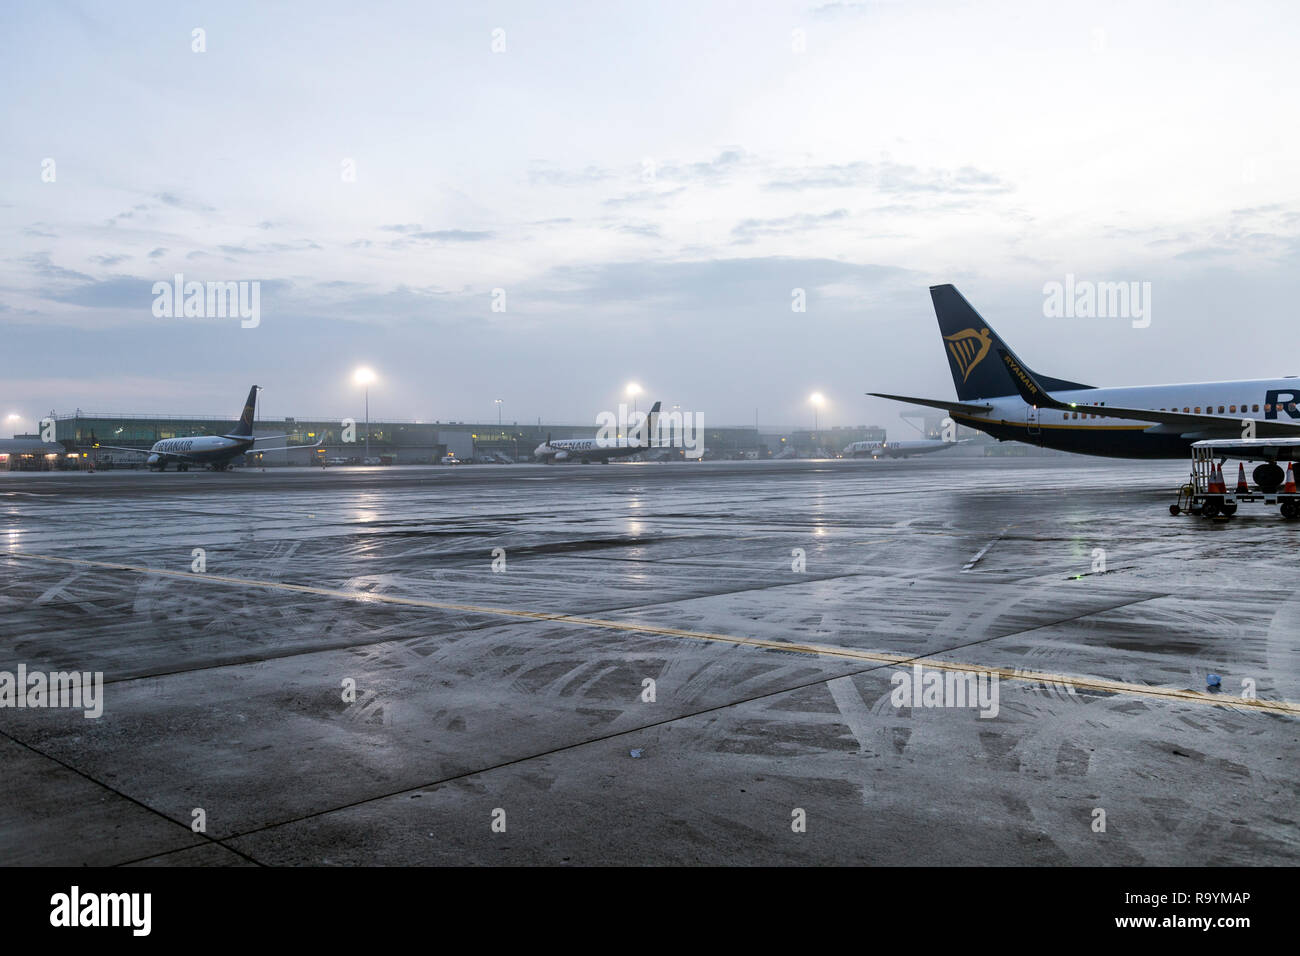 Ryanair airplanes taxiing on the tarmac of Stansted airport in foggy weather conditions, London, UK Stock Photo